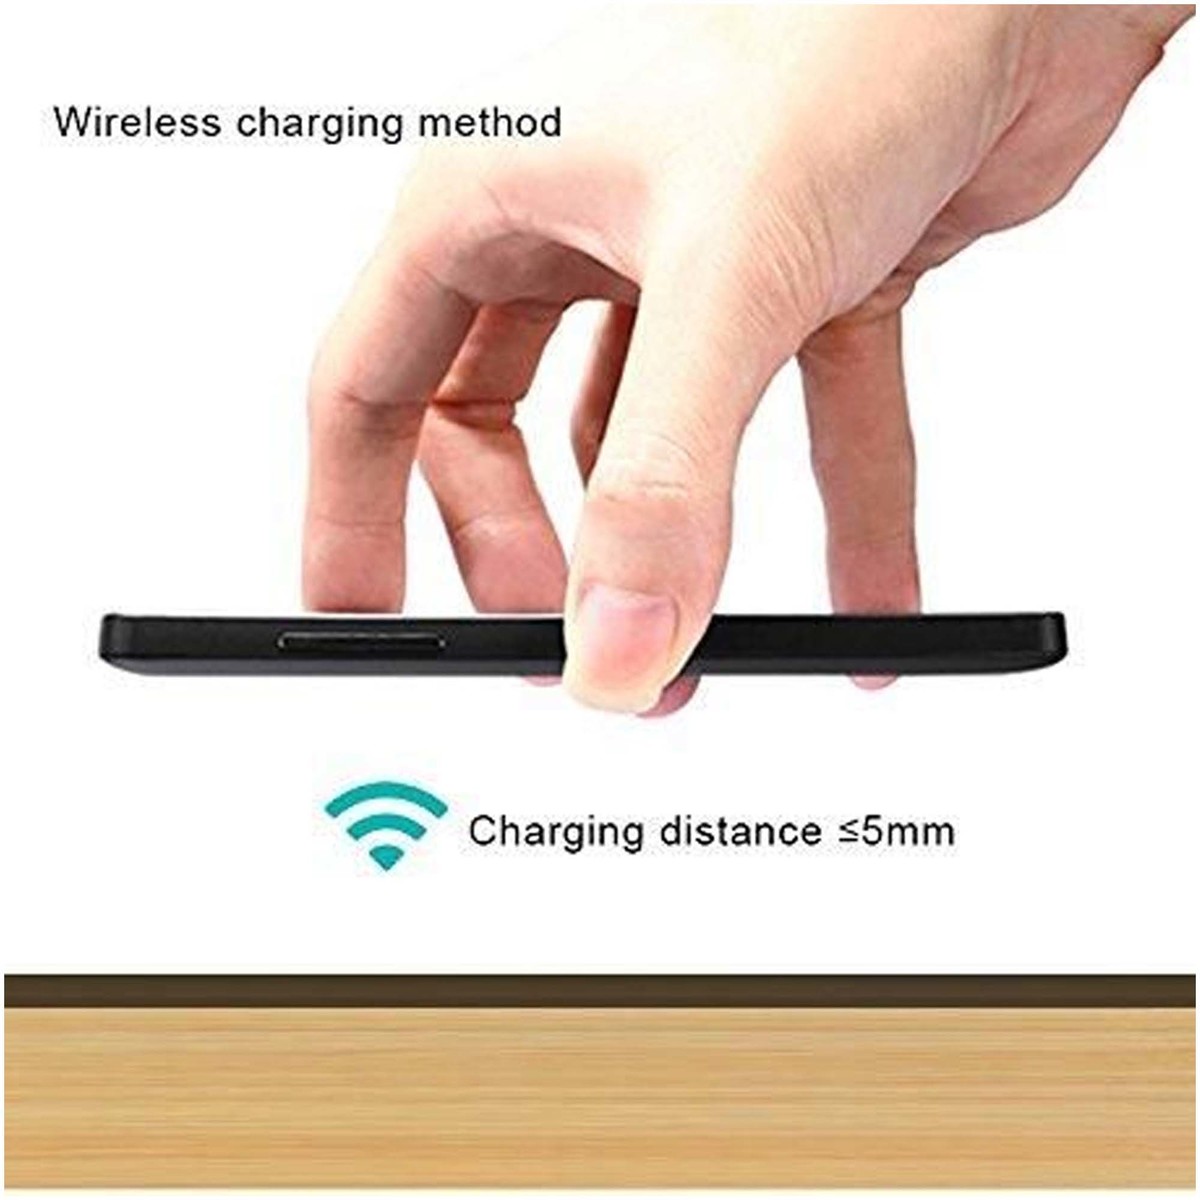 Trands Mouse pad with Wireless Charger Micro USB Charging Port MUW97